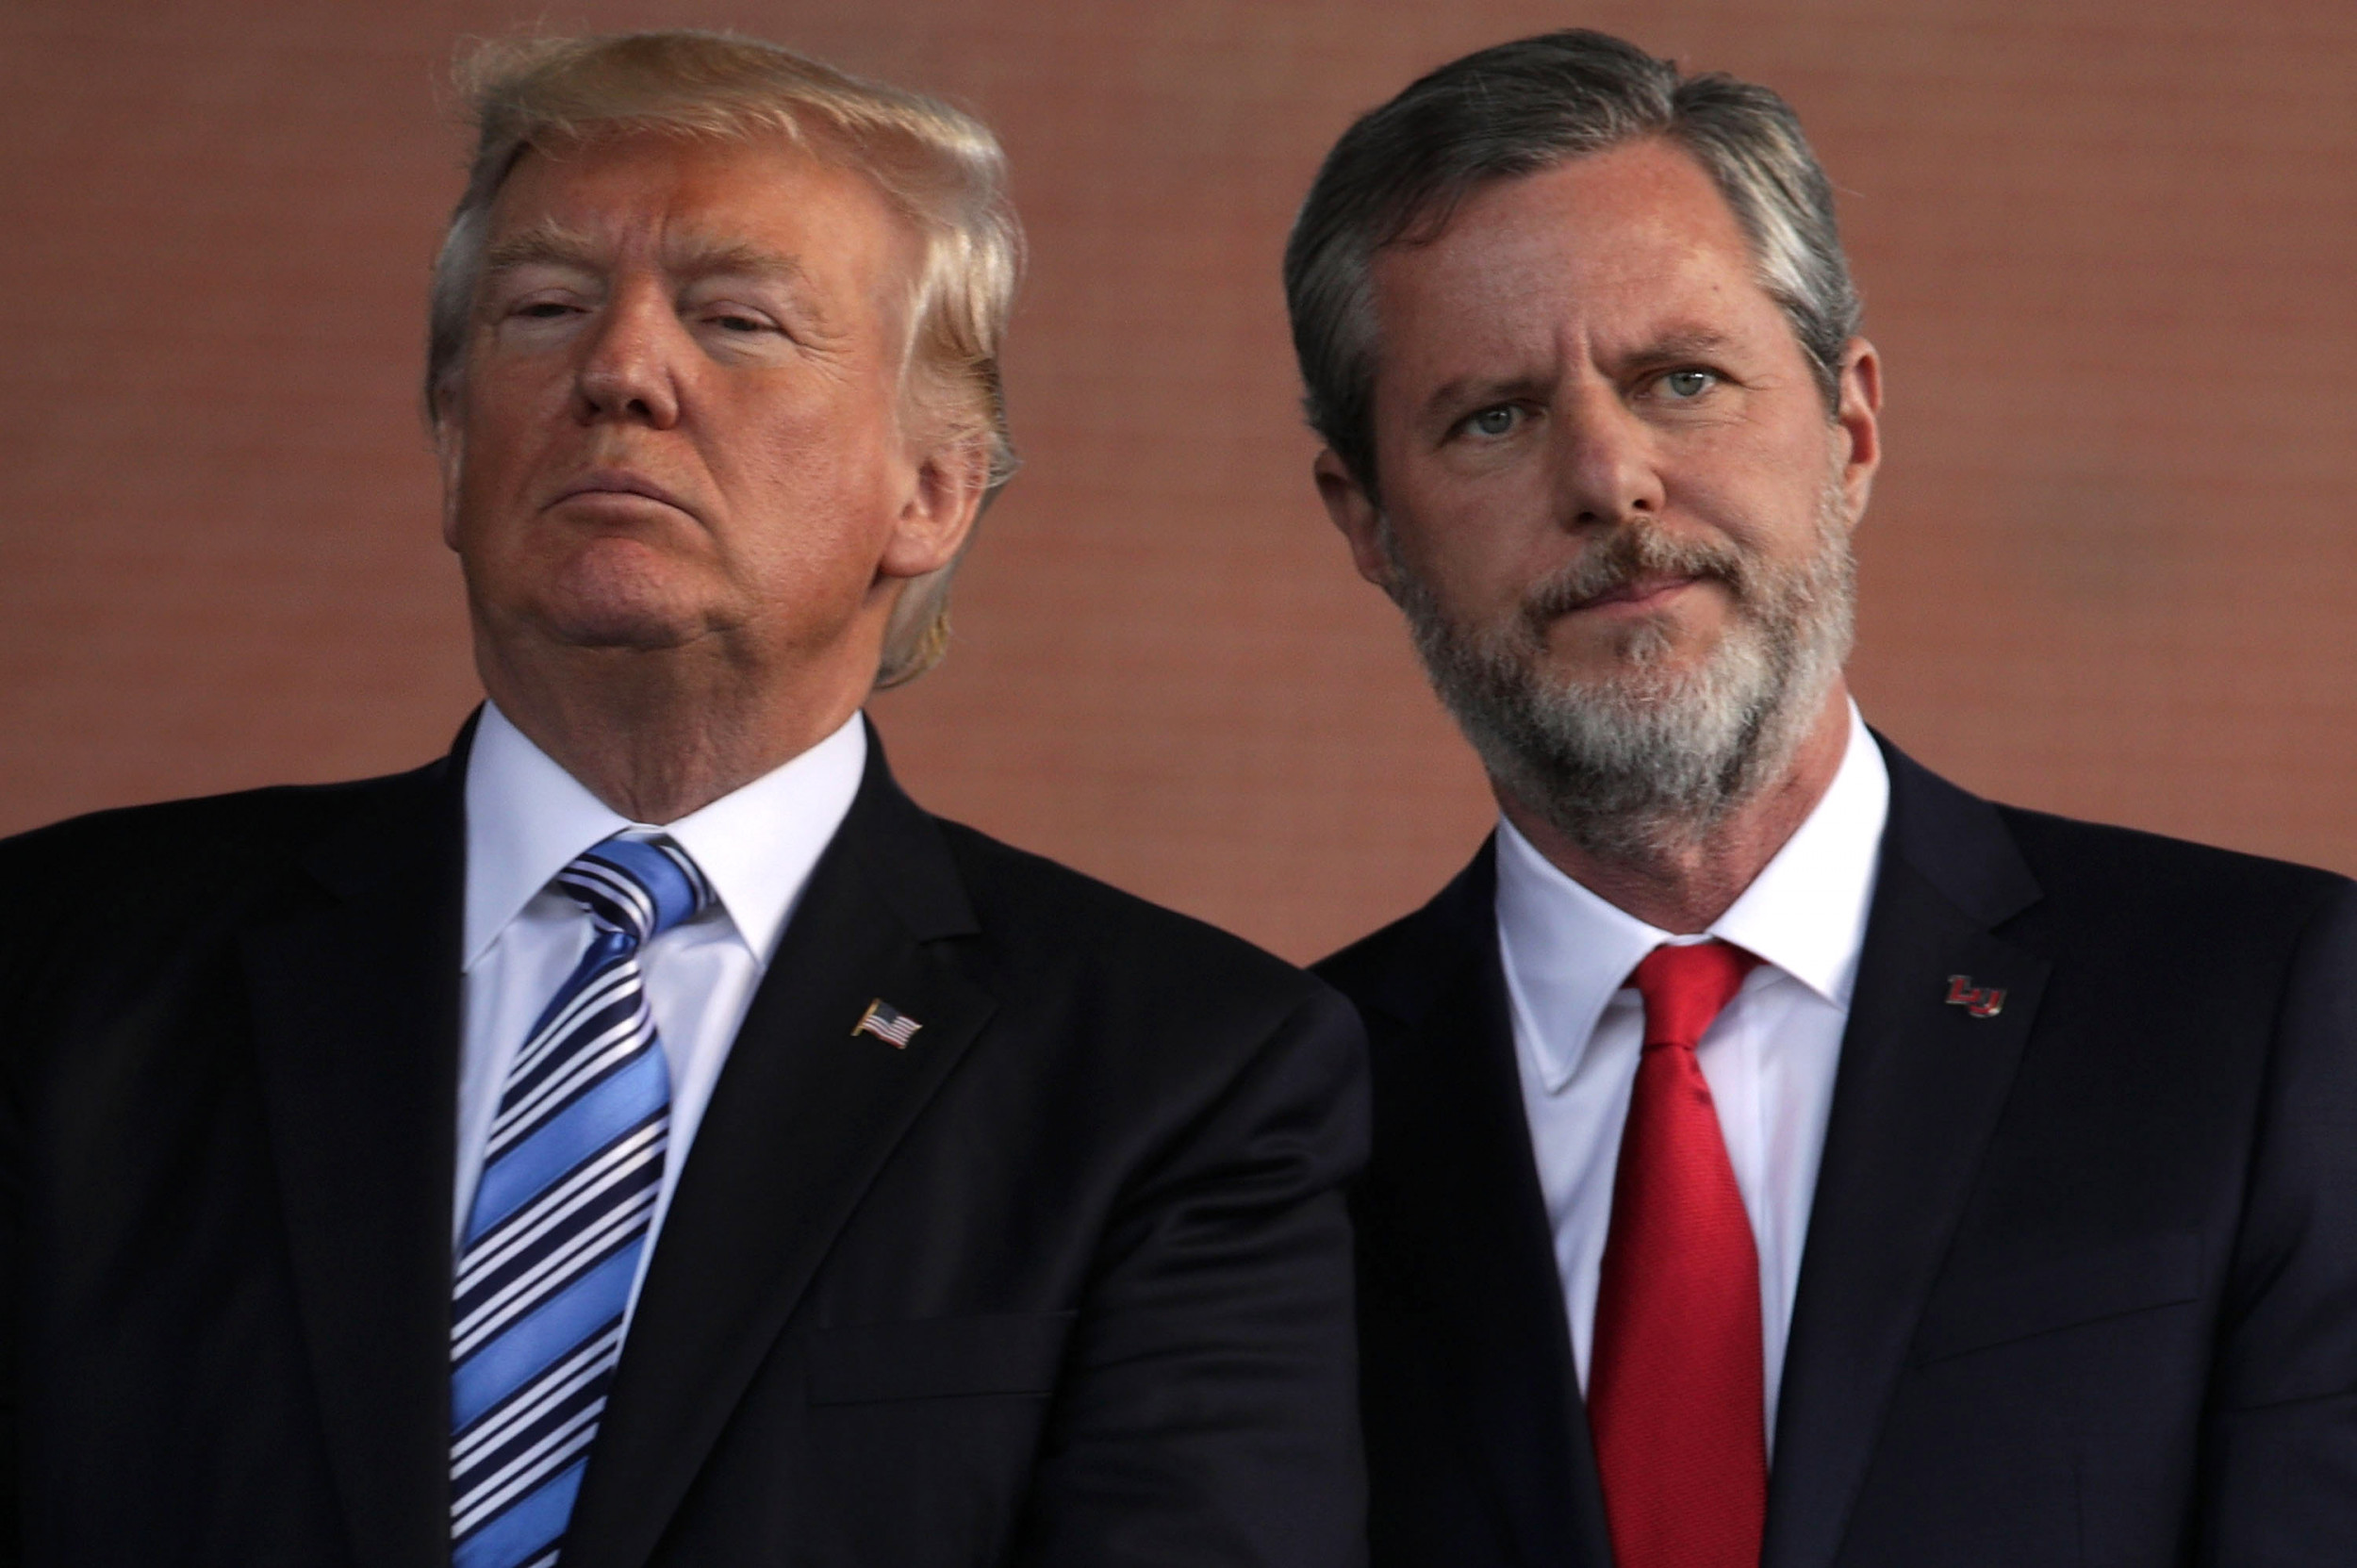 Donald Trump and Jerry Falwell